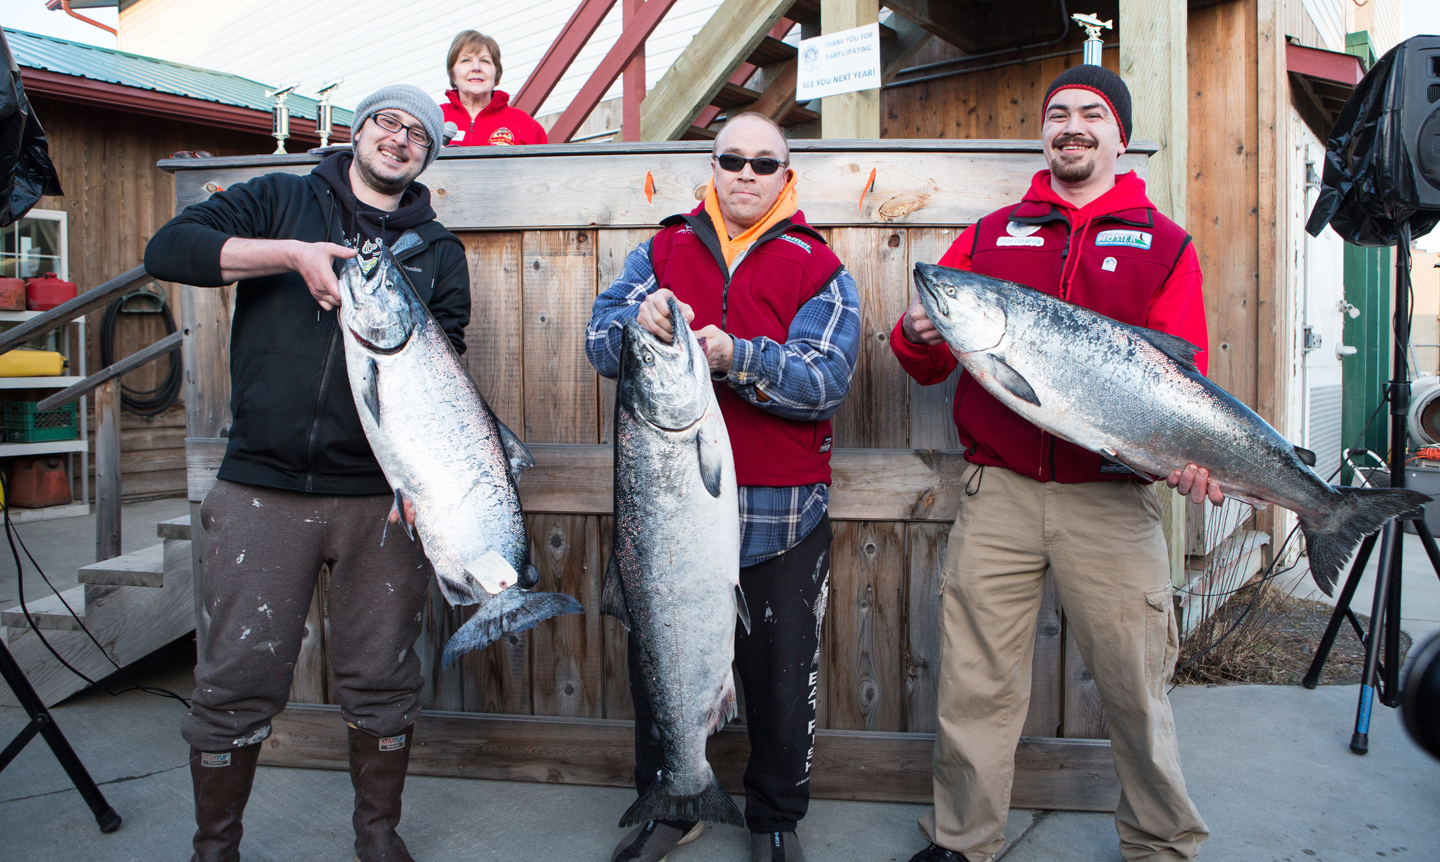 From left to right, Chelsa Johnson of Homer, Mike Olsen of Kodiak and Raymond Tepp of Kenai hold up their winning king salmon. Olsen won first place with a prize of $27,762 for a 30.40-pound fish, Johnson won second place with a prize of $18,508 for a 28.60-pound fish and Tepp won third place with a prize of $14,542 for a 26.50-pound fish. Tepp won first place in 2014, and wears the NOMAR champion vest. He presented Olsen with this year’s vest. A record 1,321 anglers fished. For complete story, go to Homer News.com.-Photo by Aaron Carpenter, Homer News